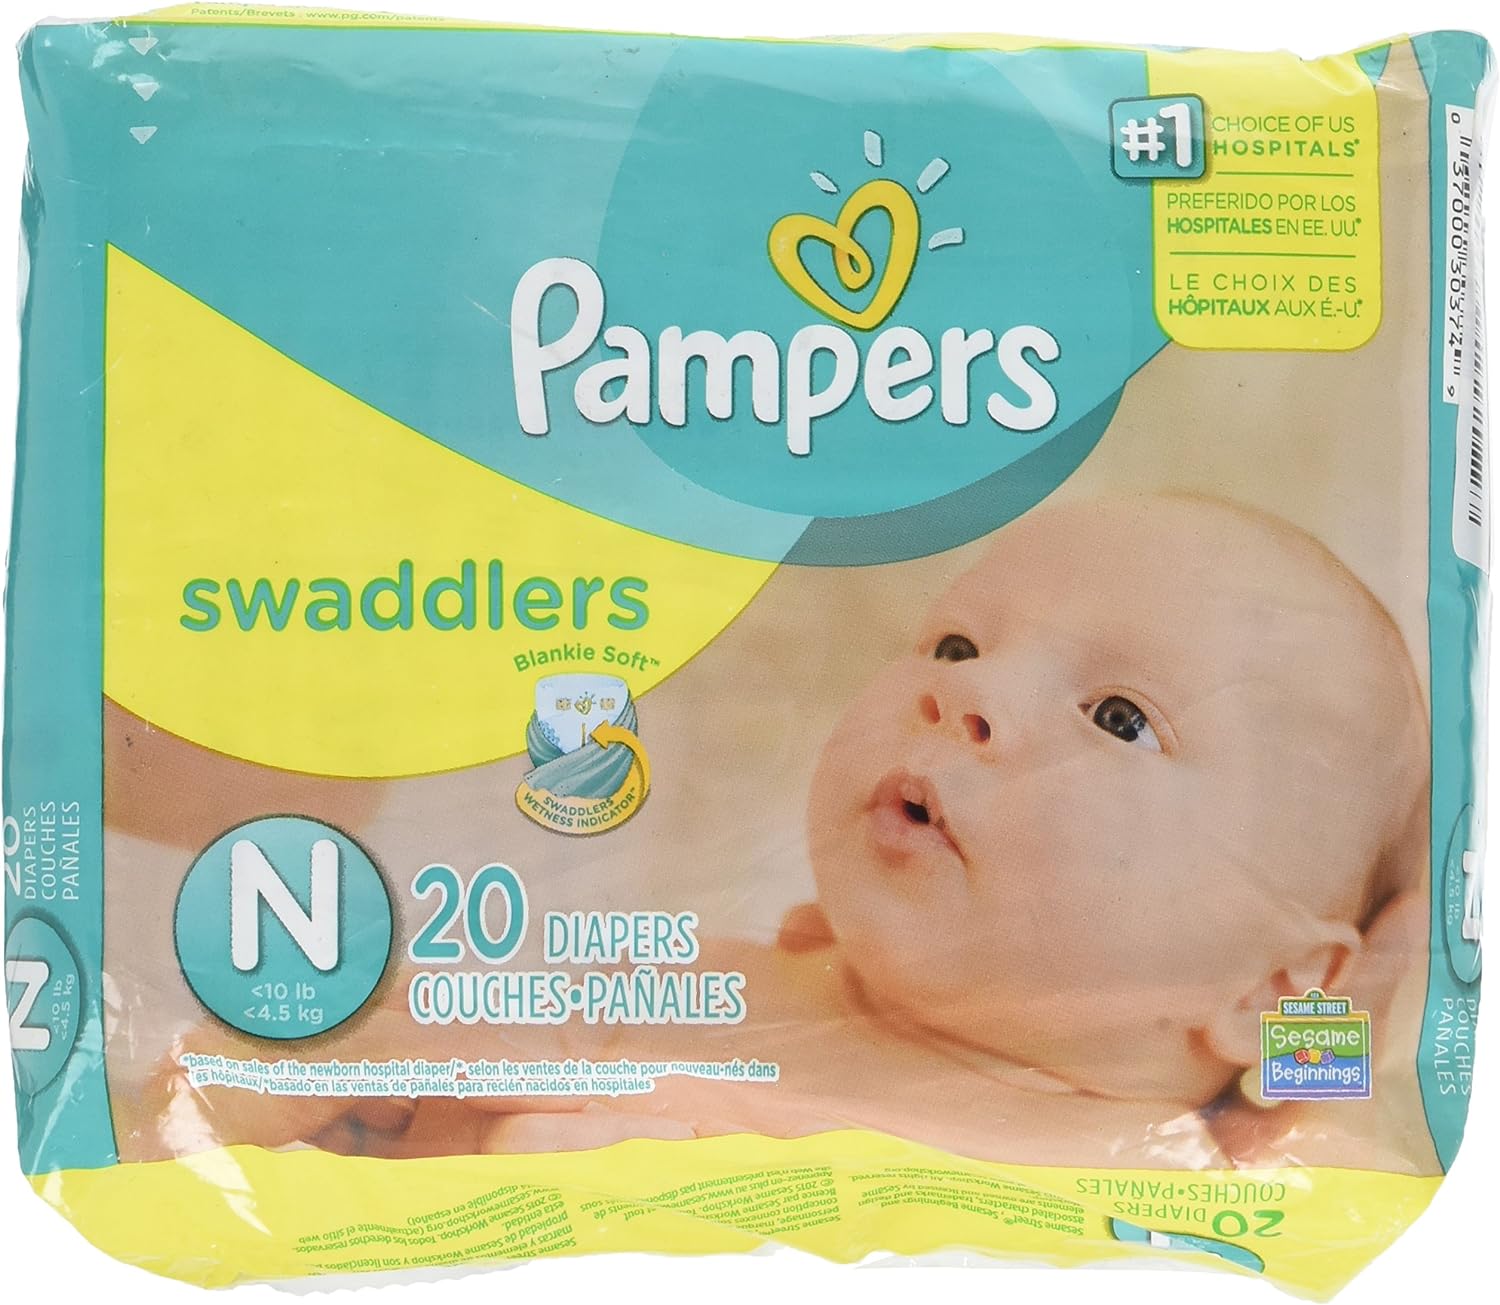  Pampers Swaddlers - Pañales desechables muy suaves para bebé  talla 4, 150 unidades : Bebés